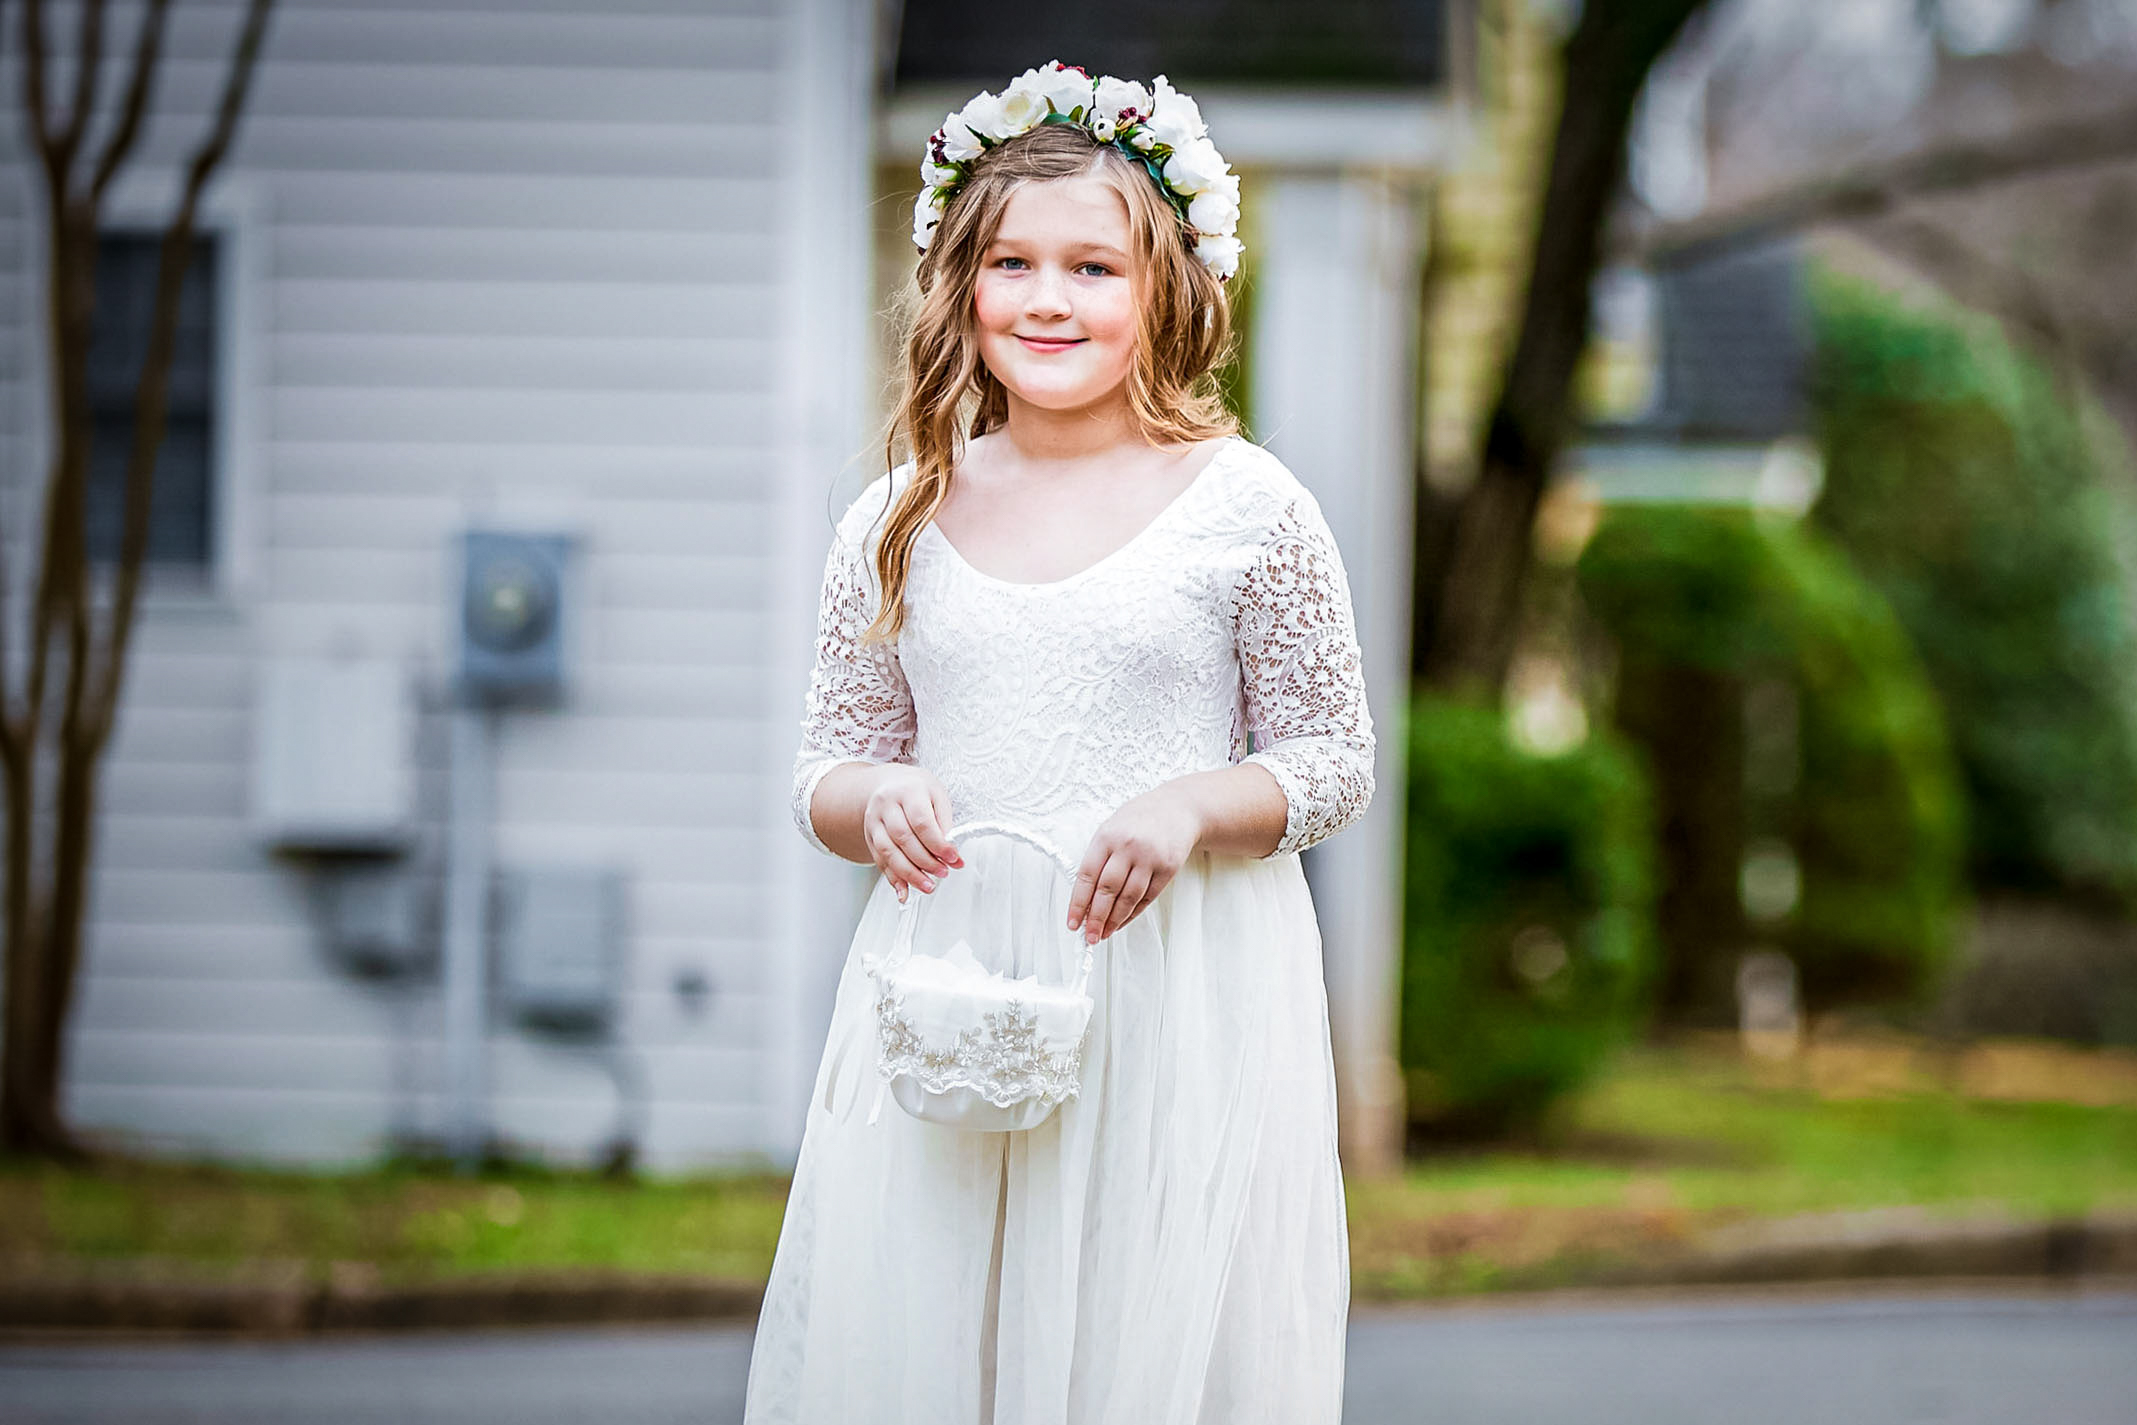 Looking for some flower-girl inspo? Explore our plethora of adorable flower girl ideas and tips in the link for a memorable wedding day!